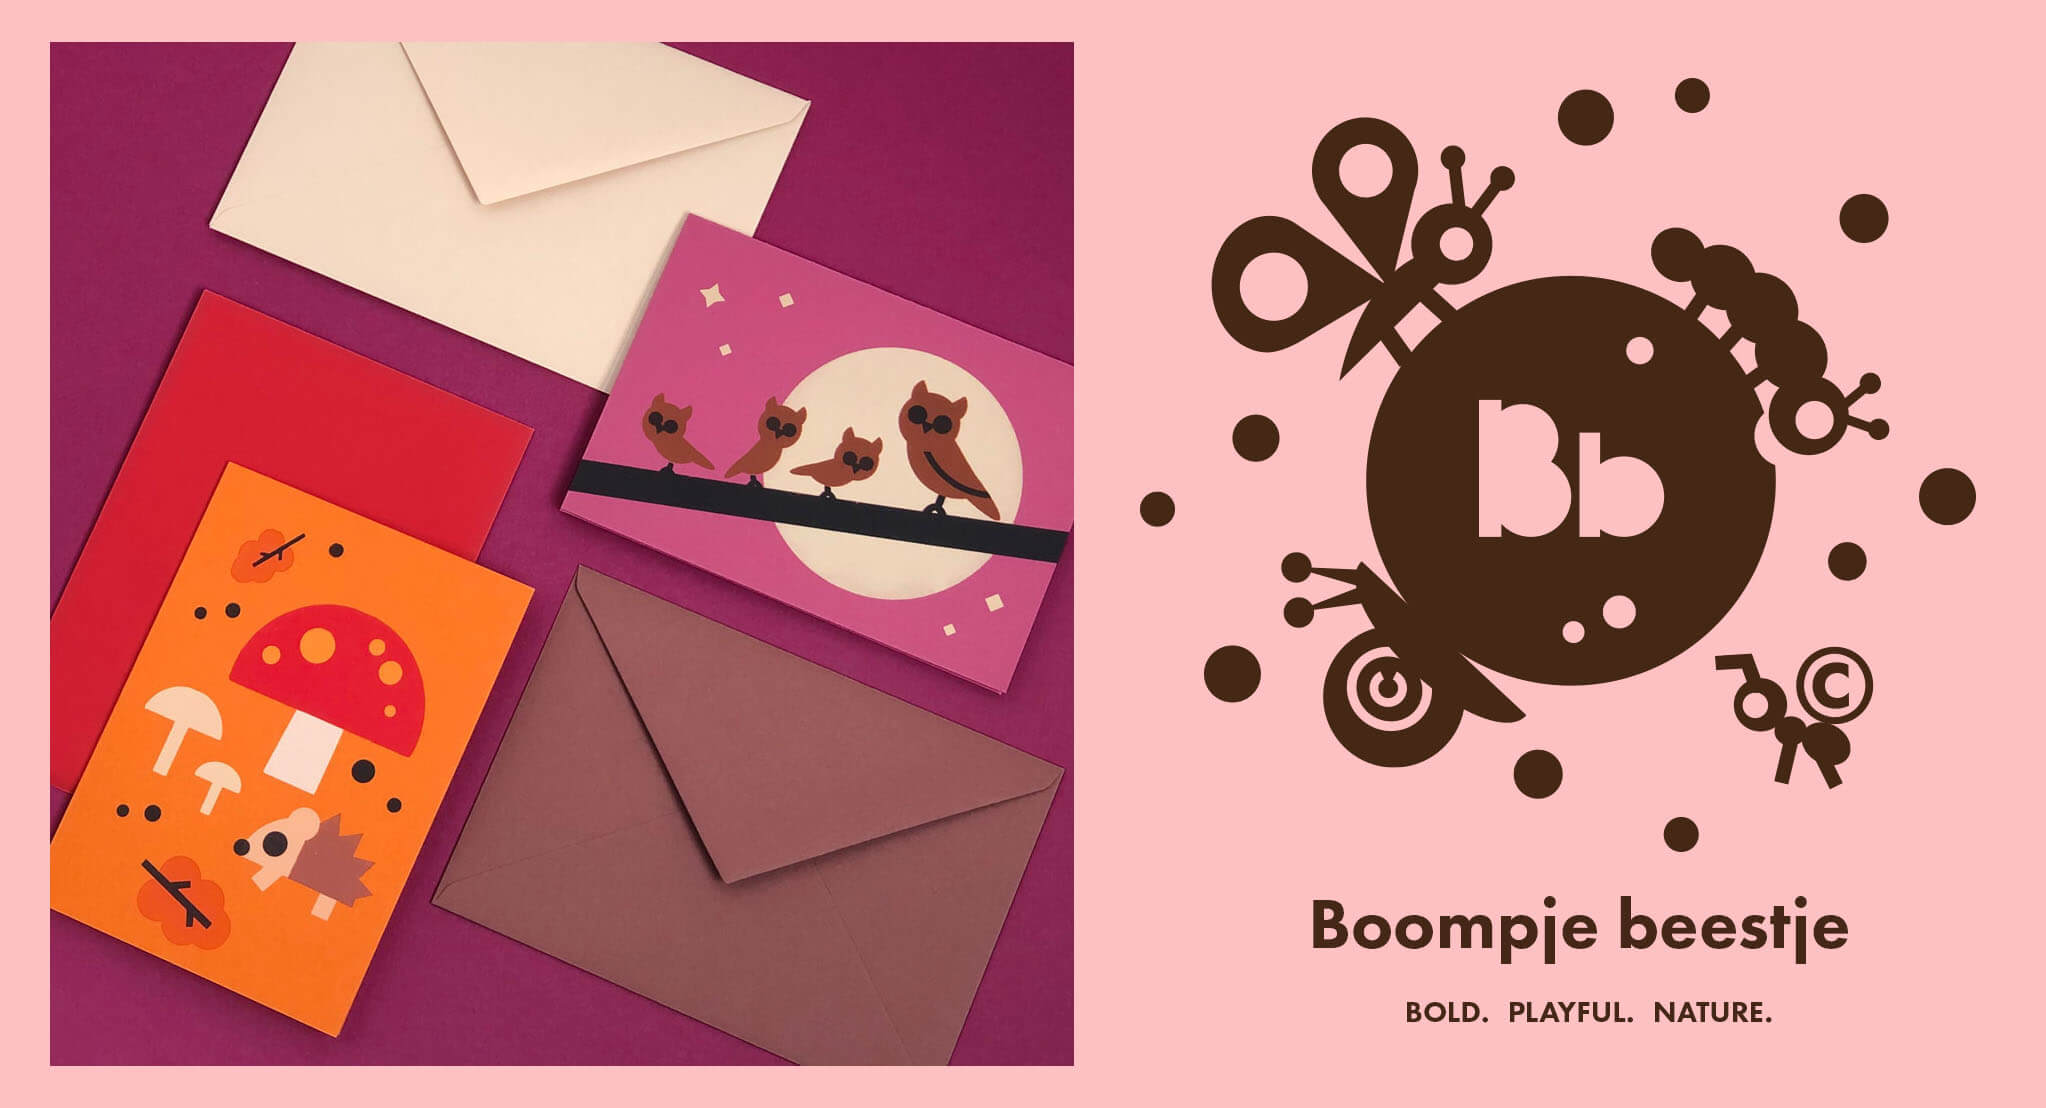 An arrangement of greeting cards with illustrated owls, hedgehog, mushrooms with envelopes. And on a pink background an illustration of a butterfly, caterpillar, snail and ant surrounded by circles a text beneath the illustration reads ‘`Boompje beestje’ and ‘Bold. Playful.Nature’